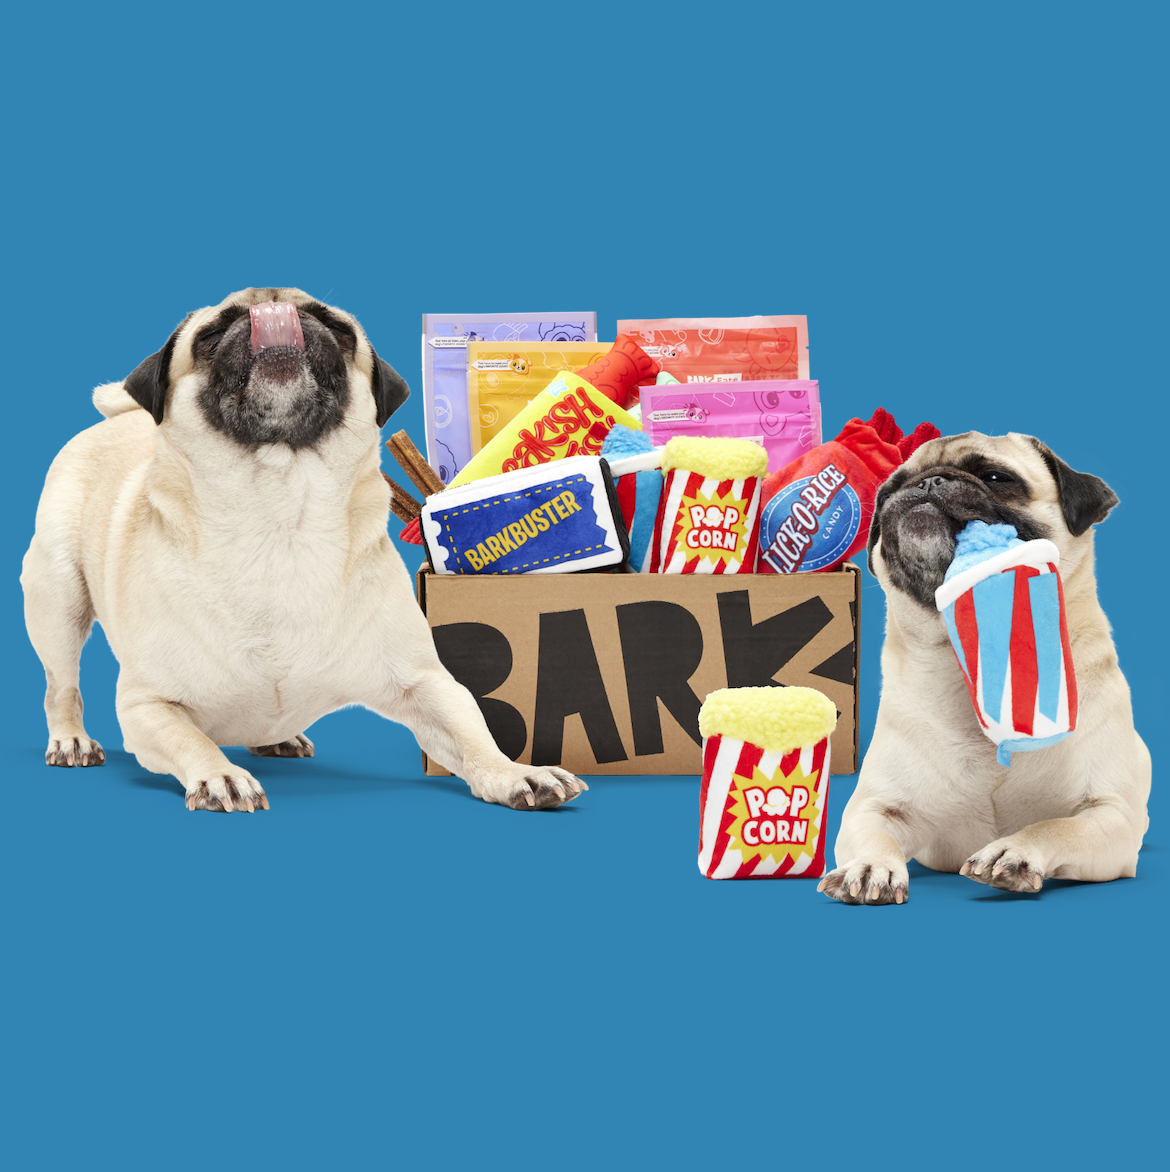 Paws'-itively spoiled: Gifts for pets and pet owners alike - Gift Shop  Magazine